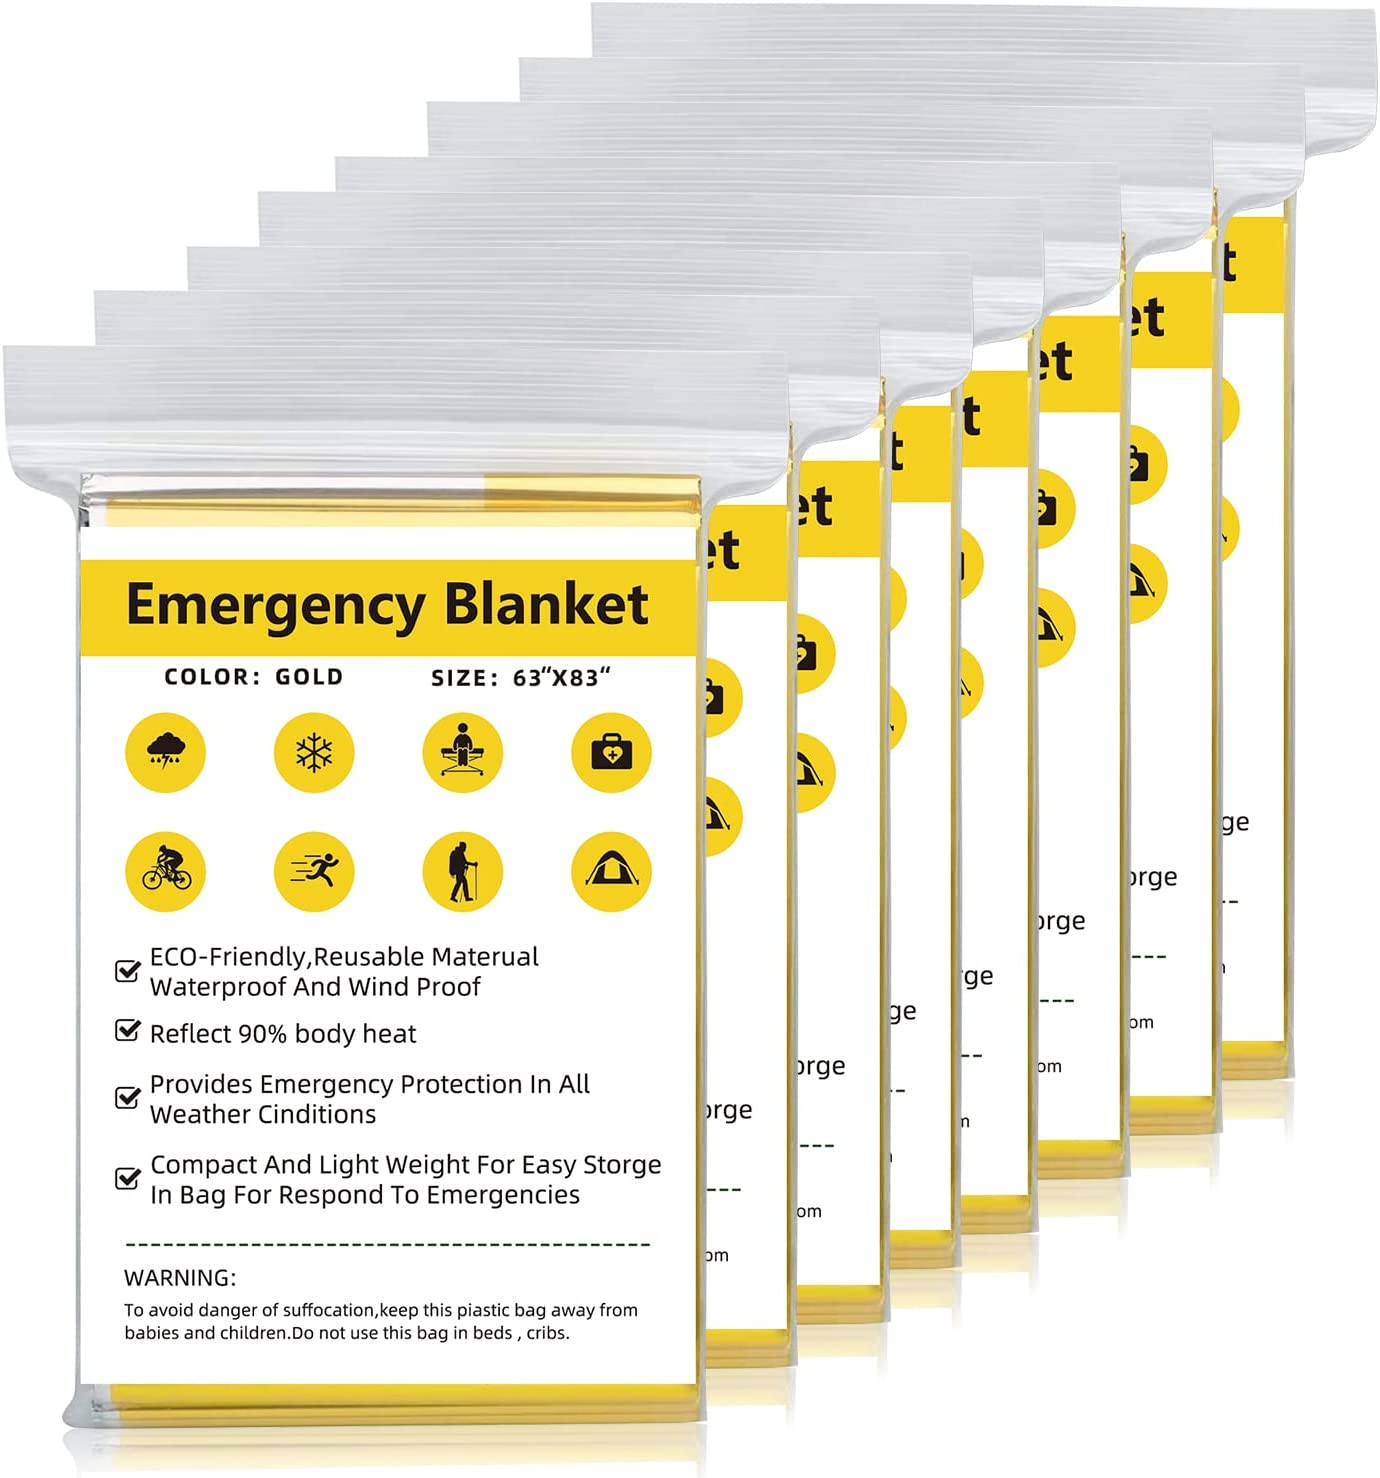 Car Roadside Emergency Kit Accessories-Emergency Blanket|Essential Emergency Roadside Kit Accessories Always Prepared Replacement Parts|Automotive Safety Kits-Emergency Blanket(8-Pack)(Gold)